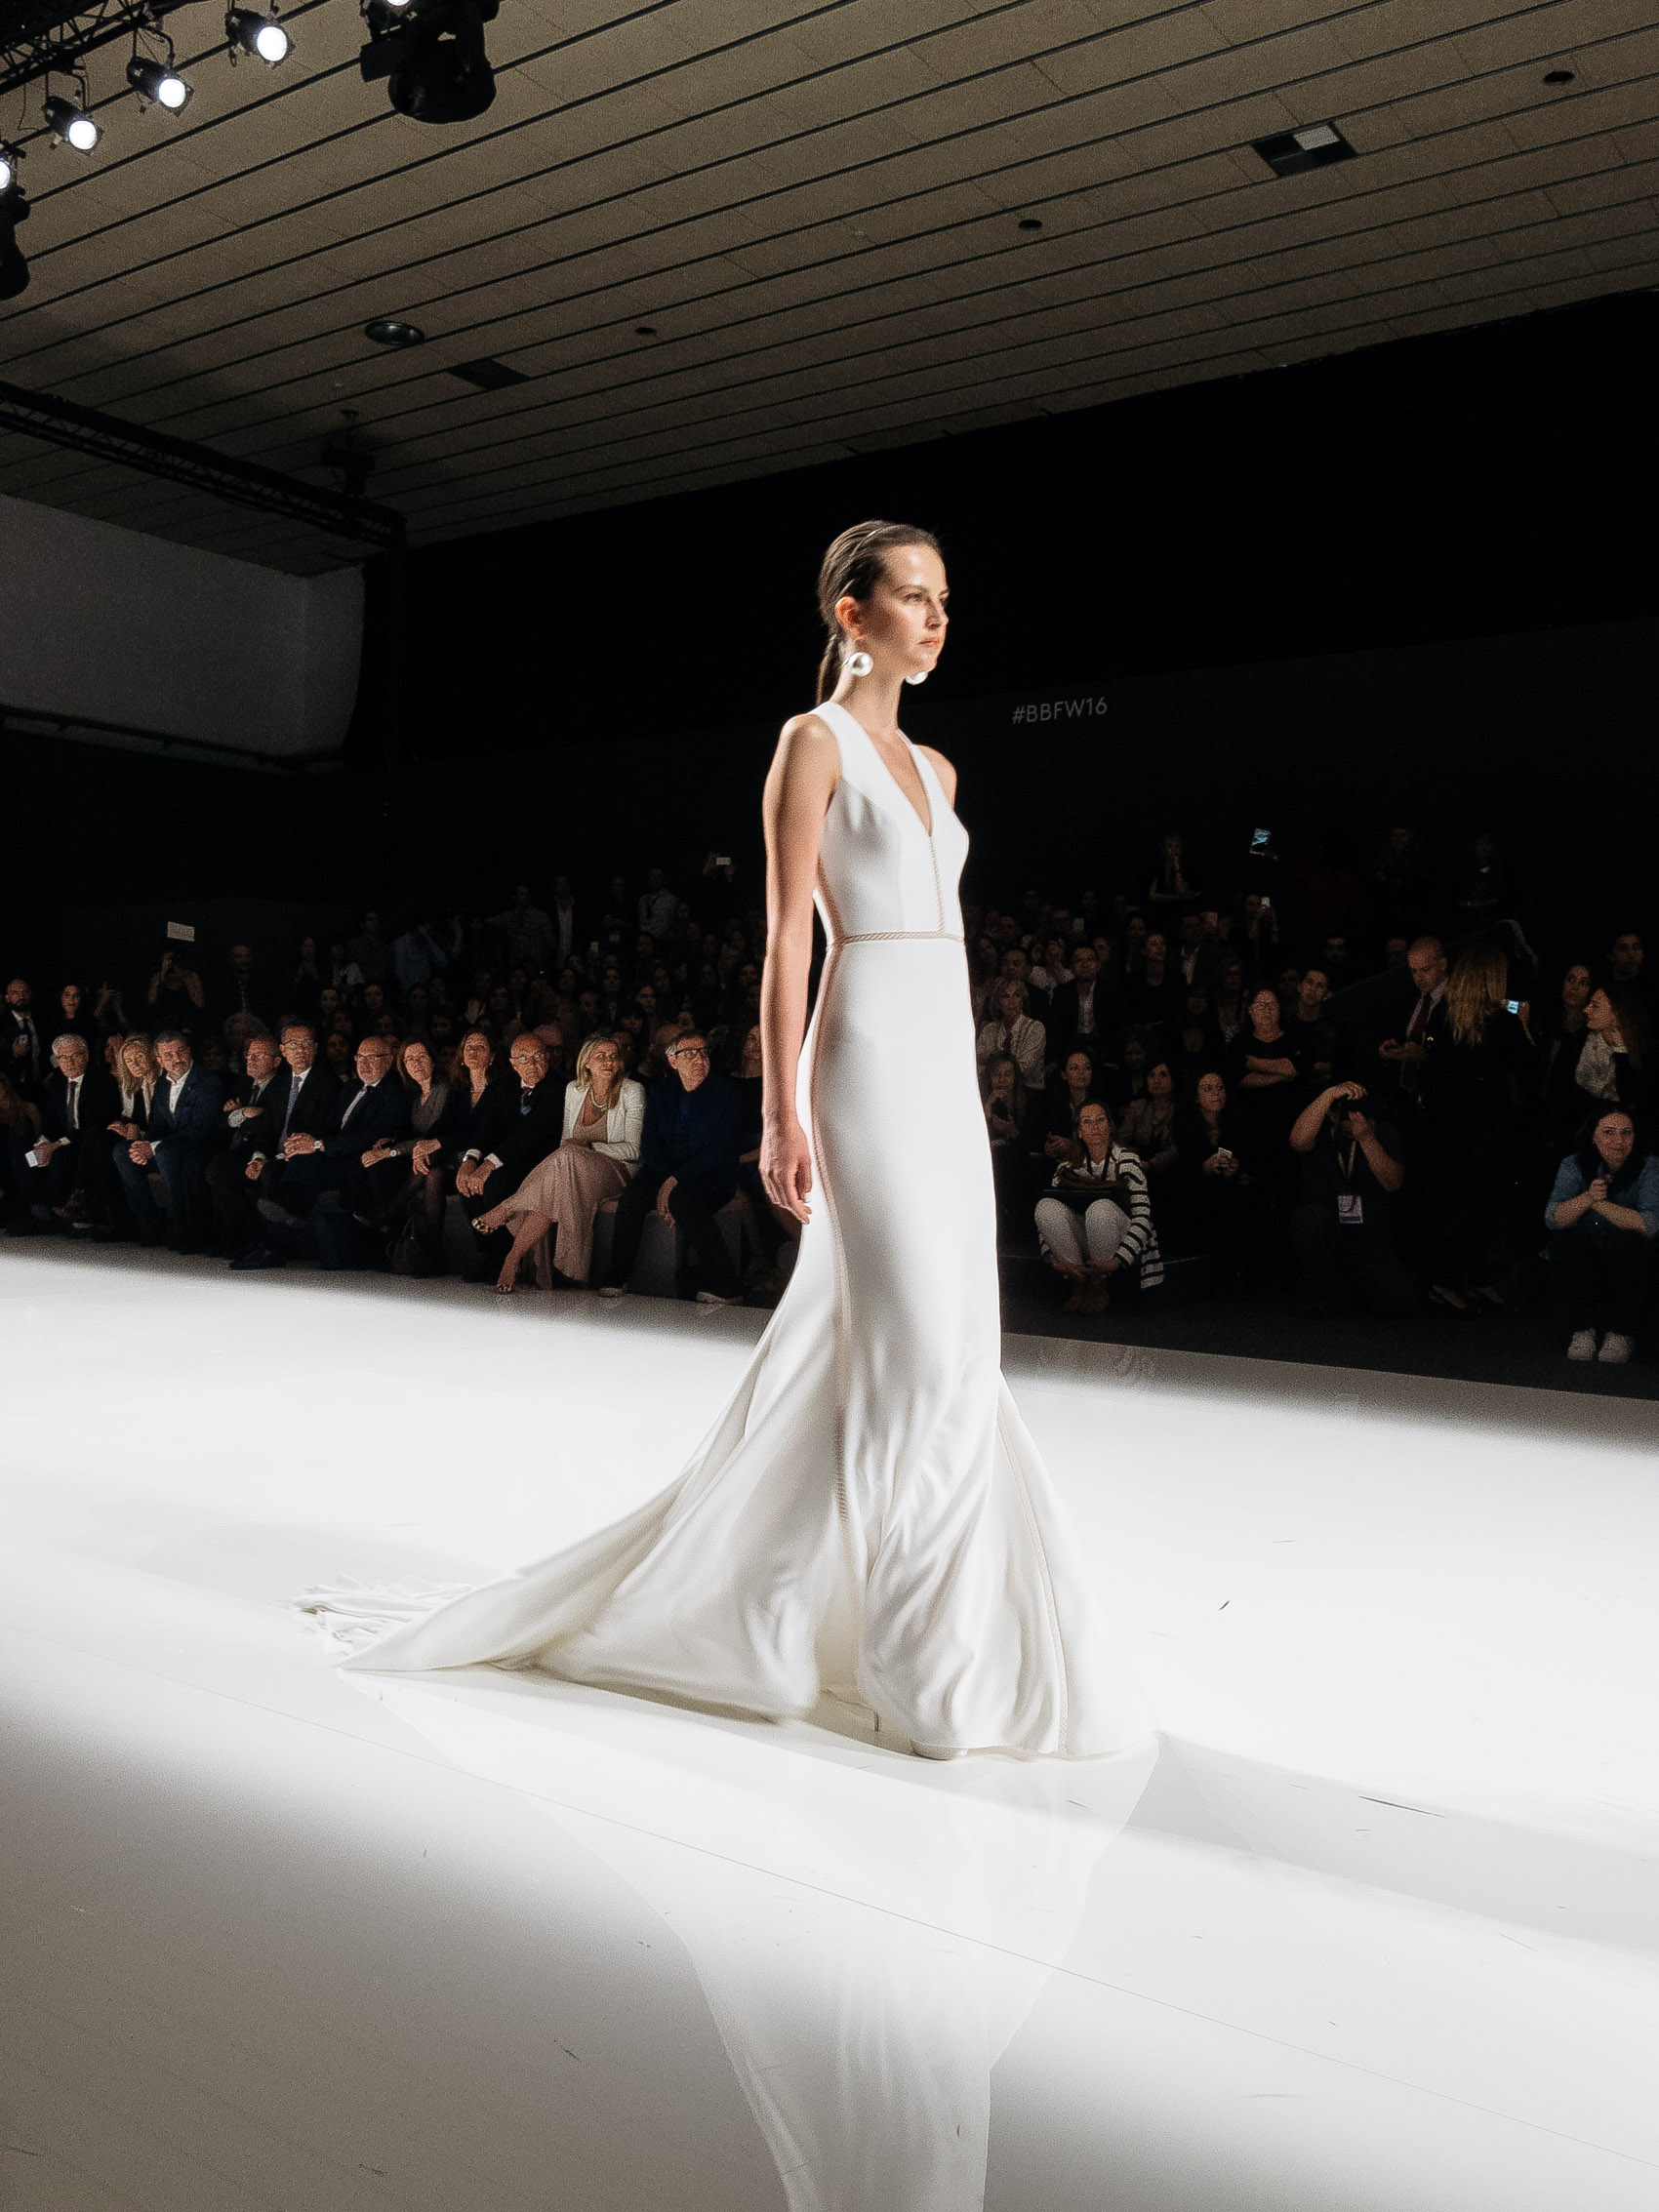 Clean, simple, minimal wedding dress from the 2017 Rosa Clara bridal collection shown during Barcelona Bridal Fashion Week